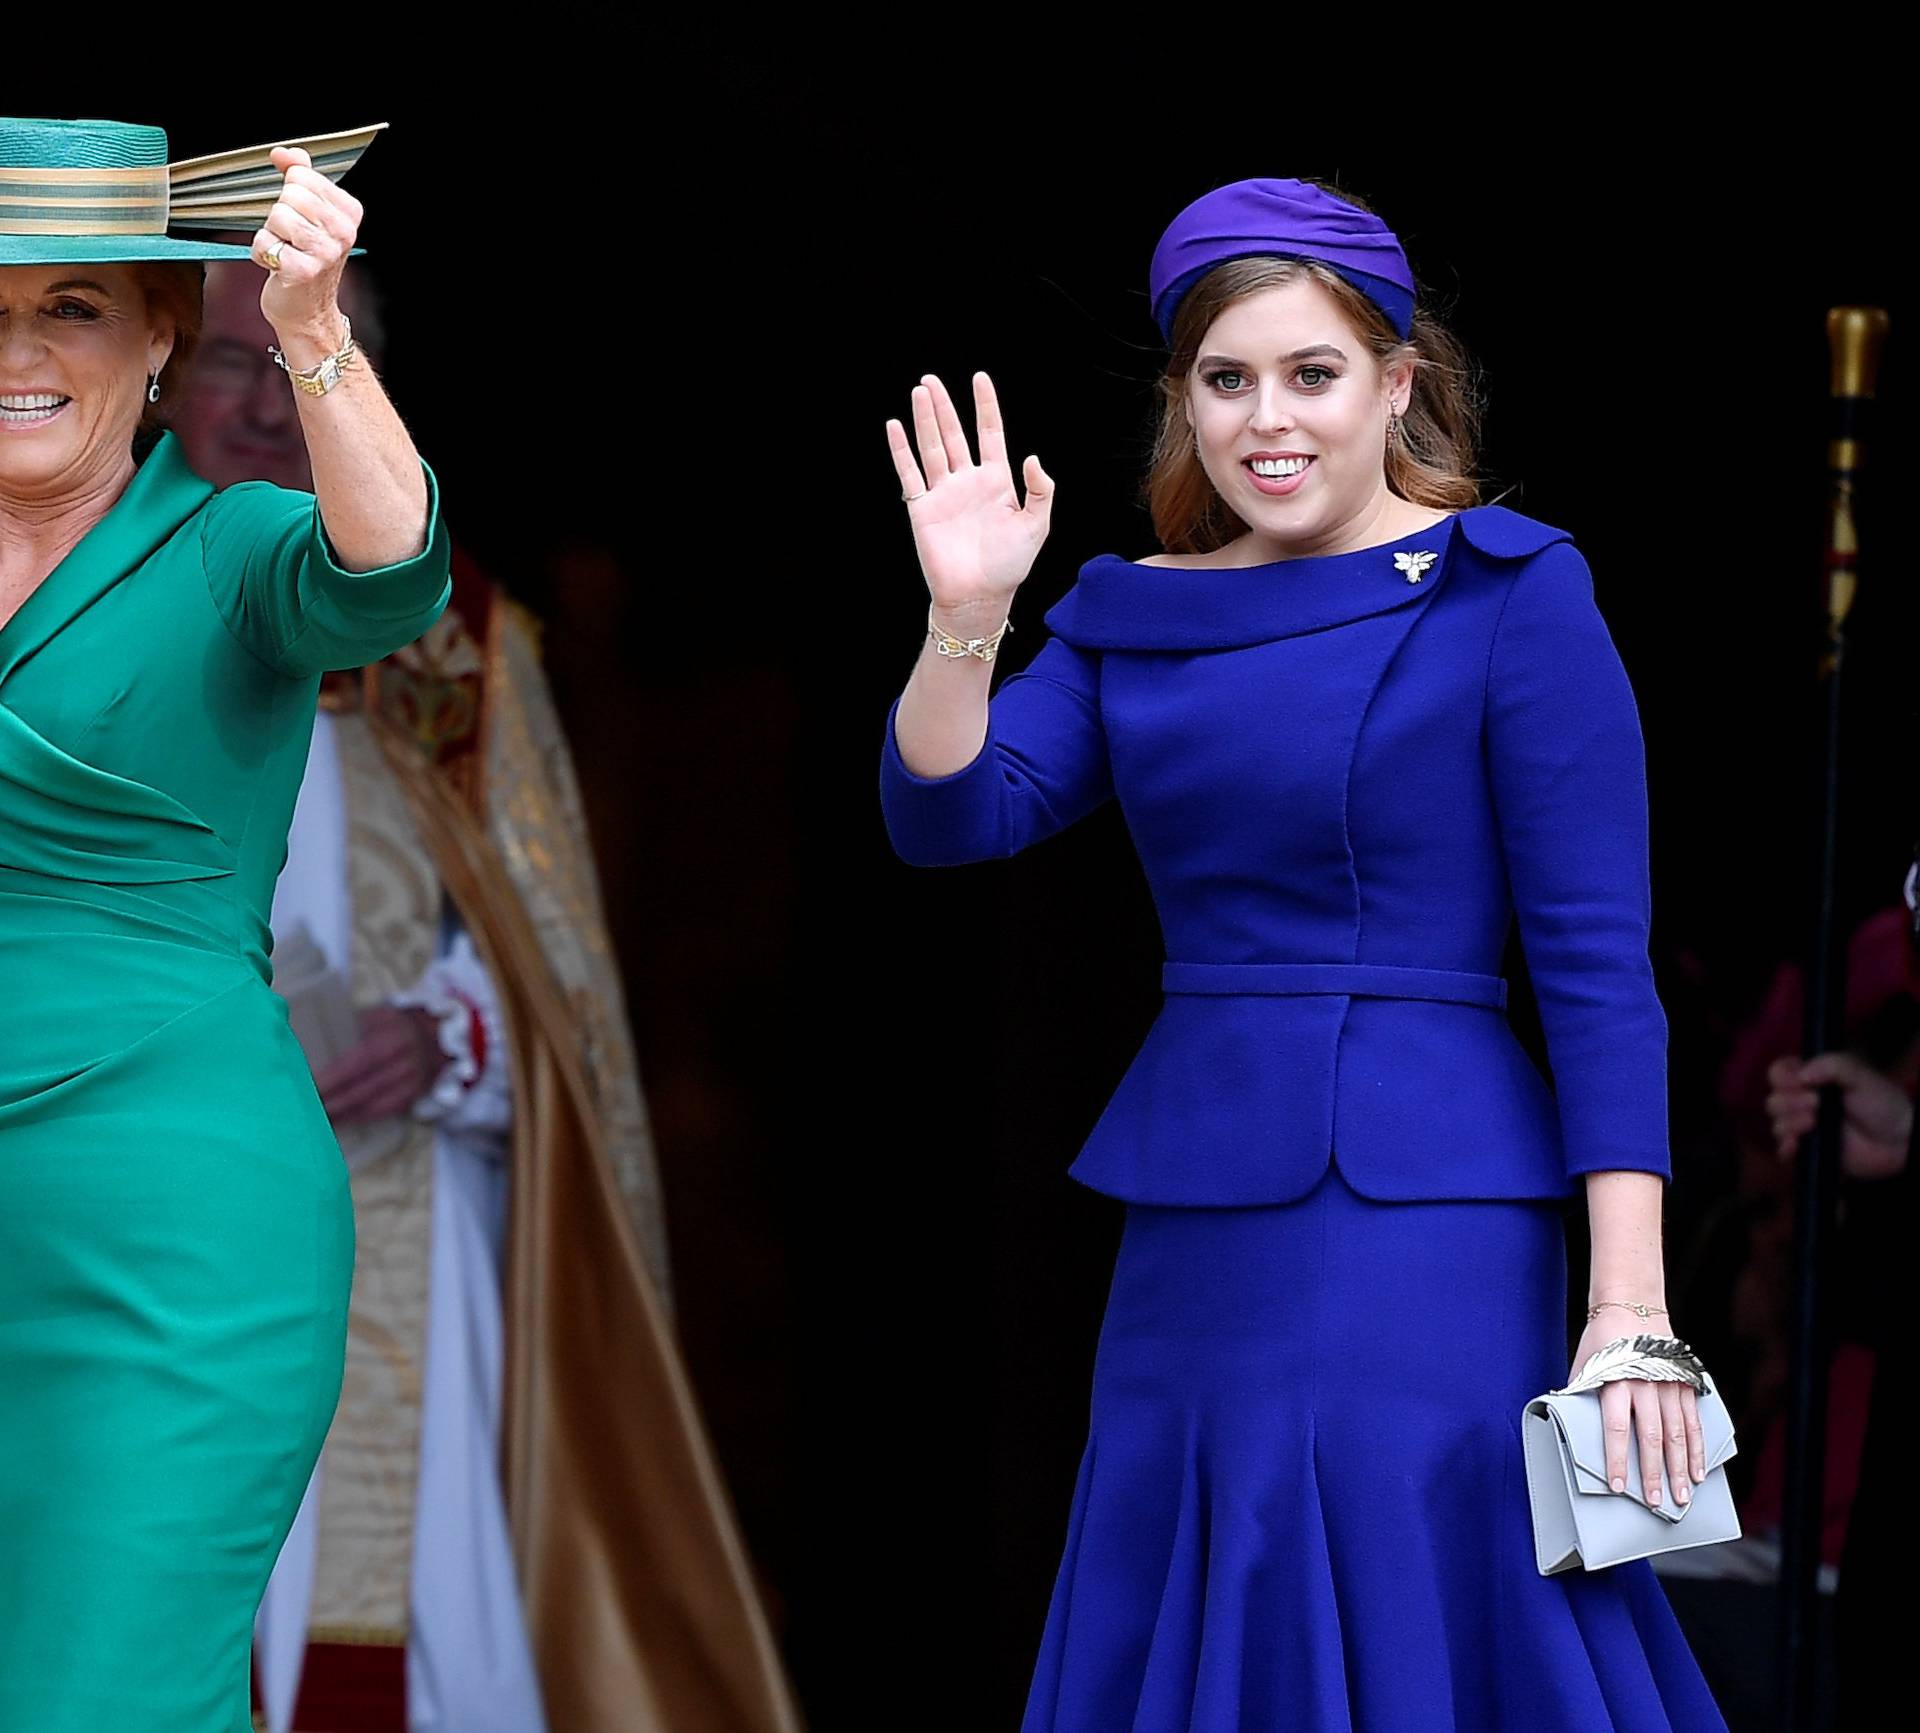 Princess Beatrice and Sarah Ferguson arrive at Windsor Castle for the royal wedding of Britain's Princess Eugenie and Jack Brooksbank in Windsor